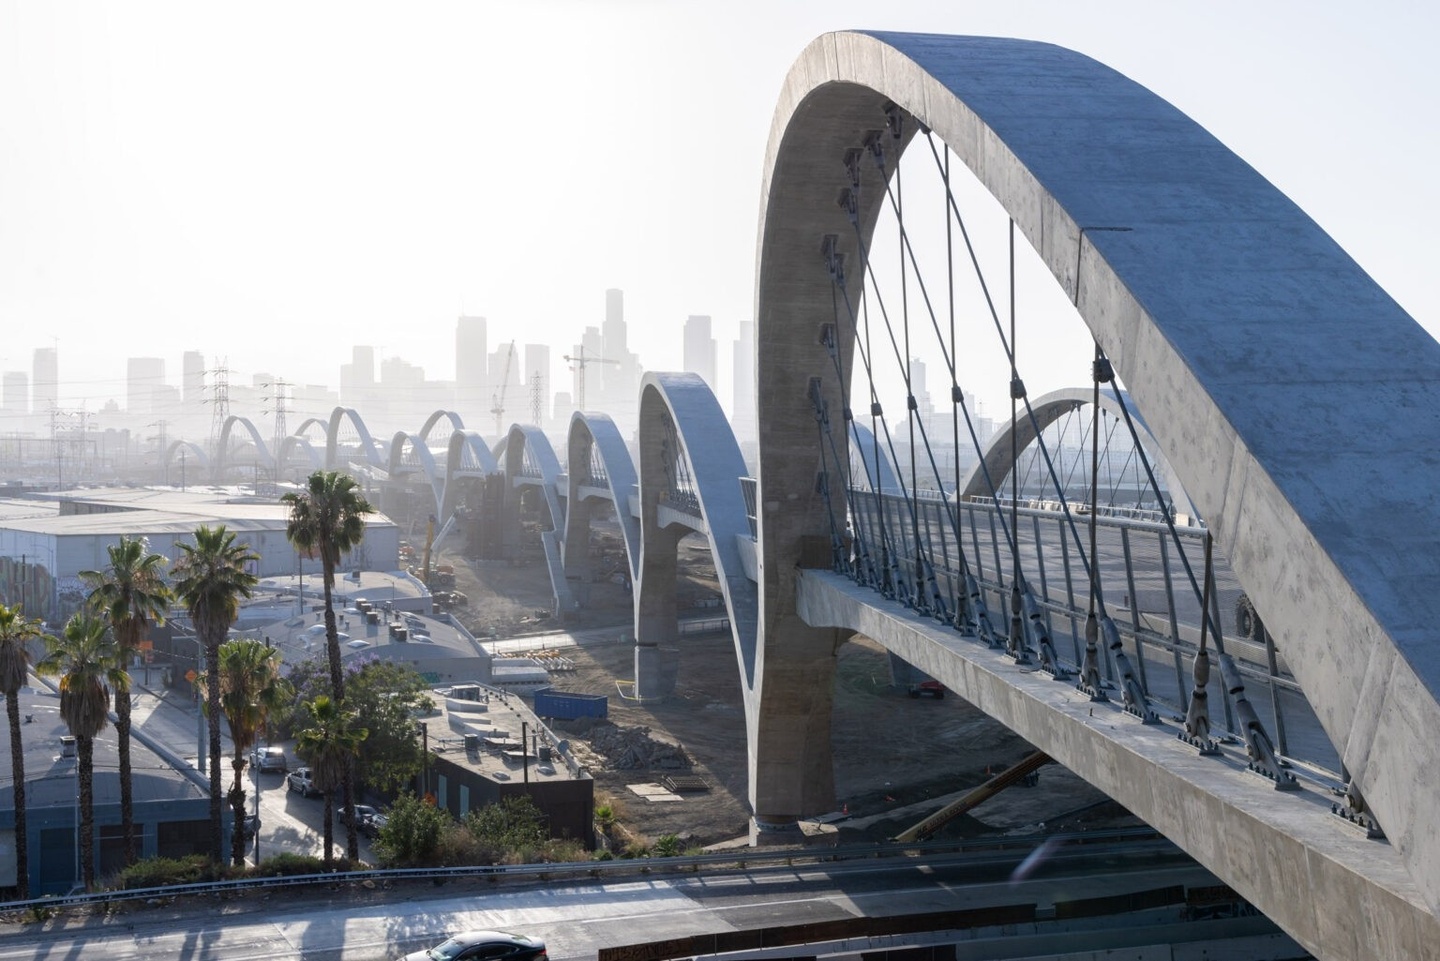 image of the 3,500-foot-long Sixth Street Viaduct in Los Angeles